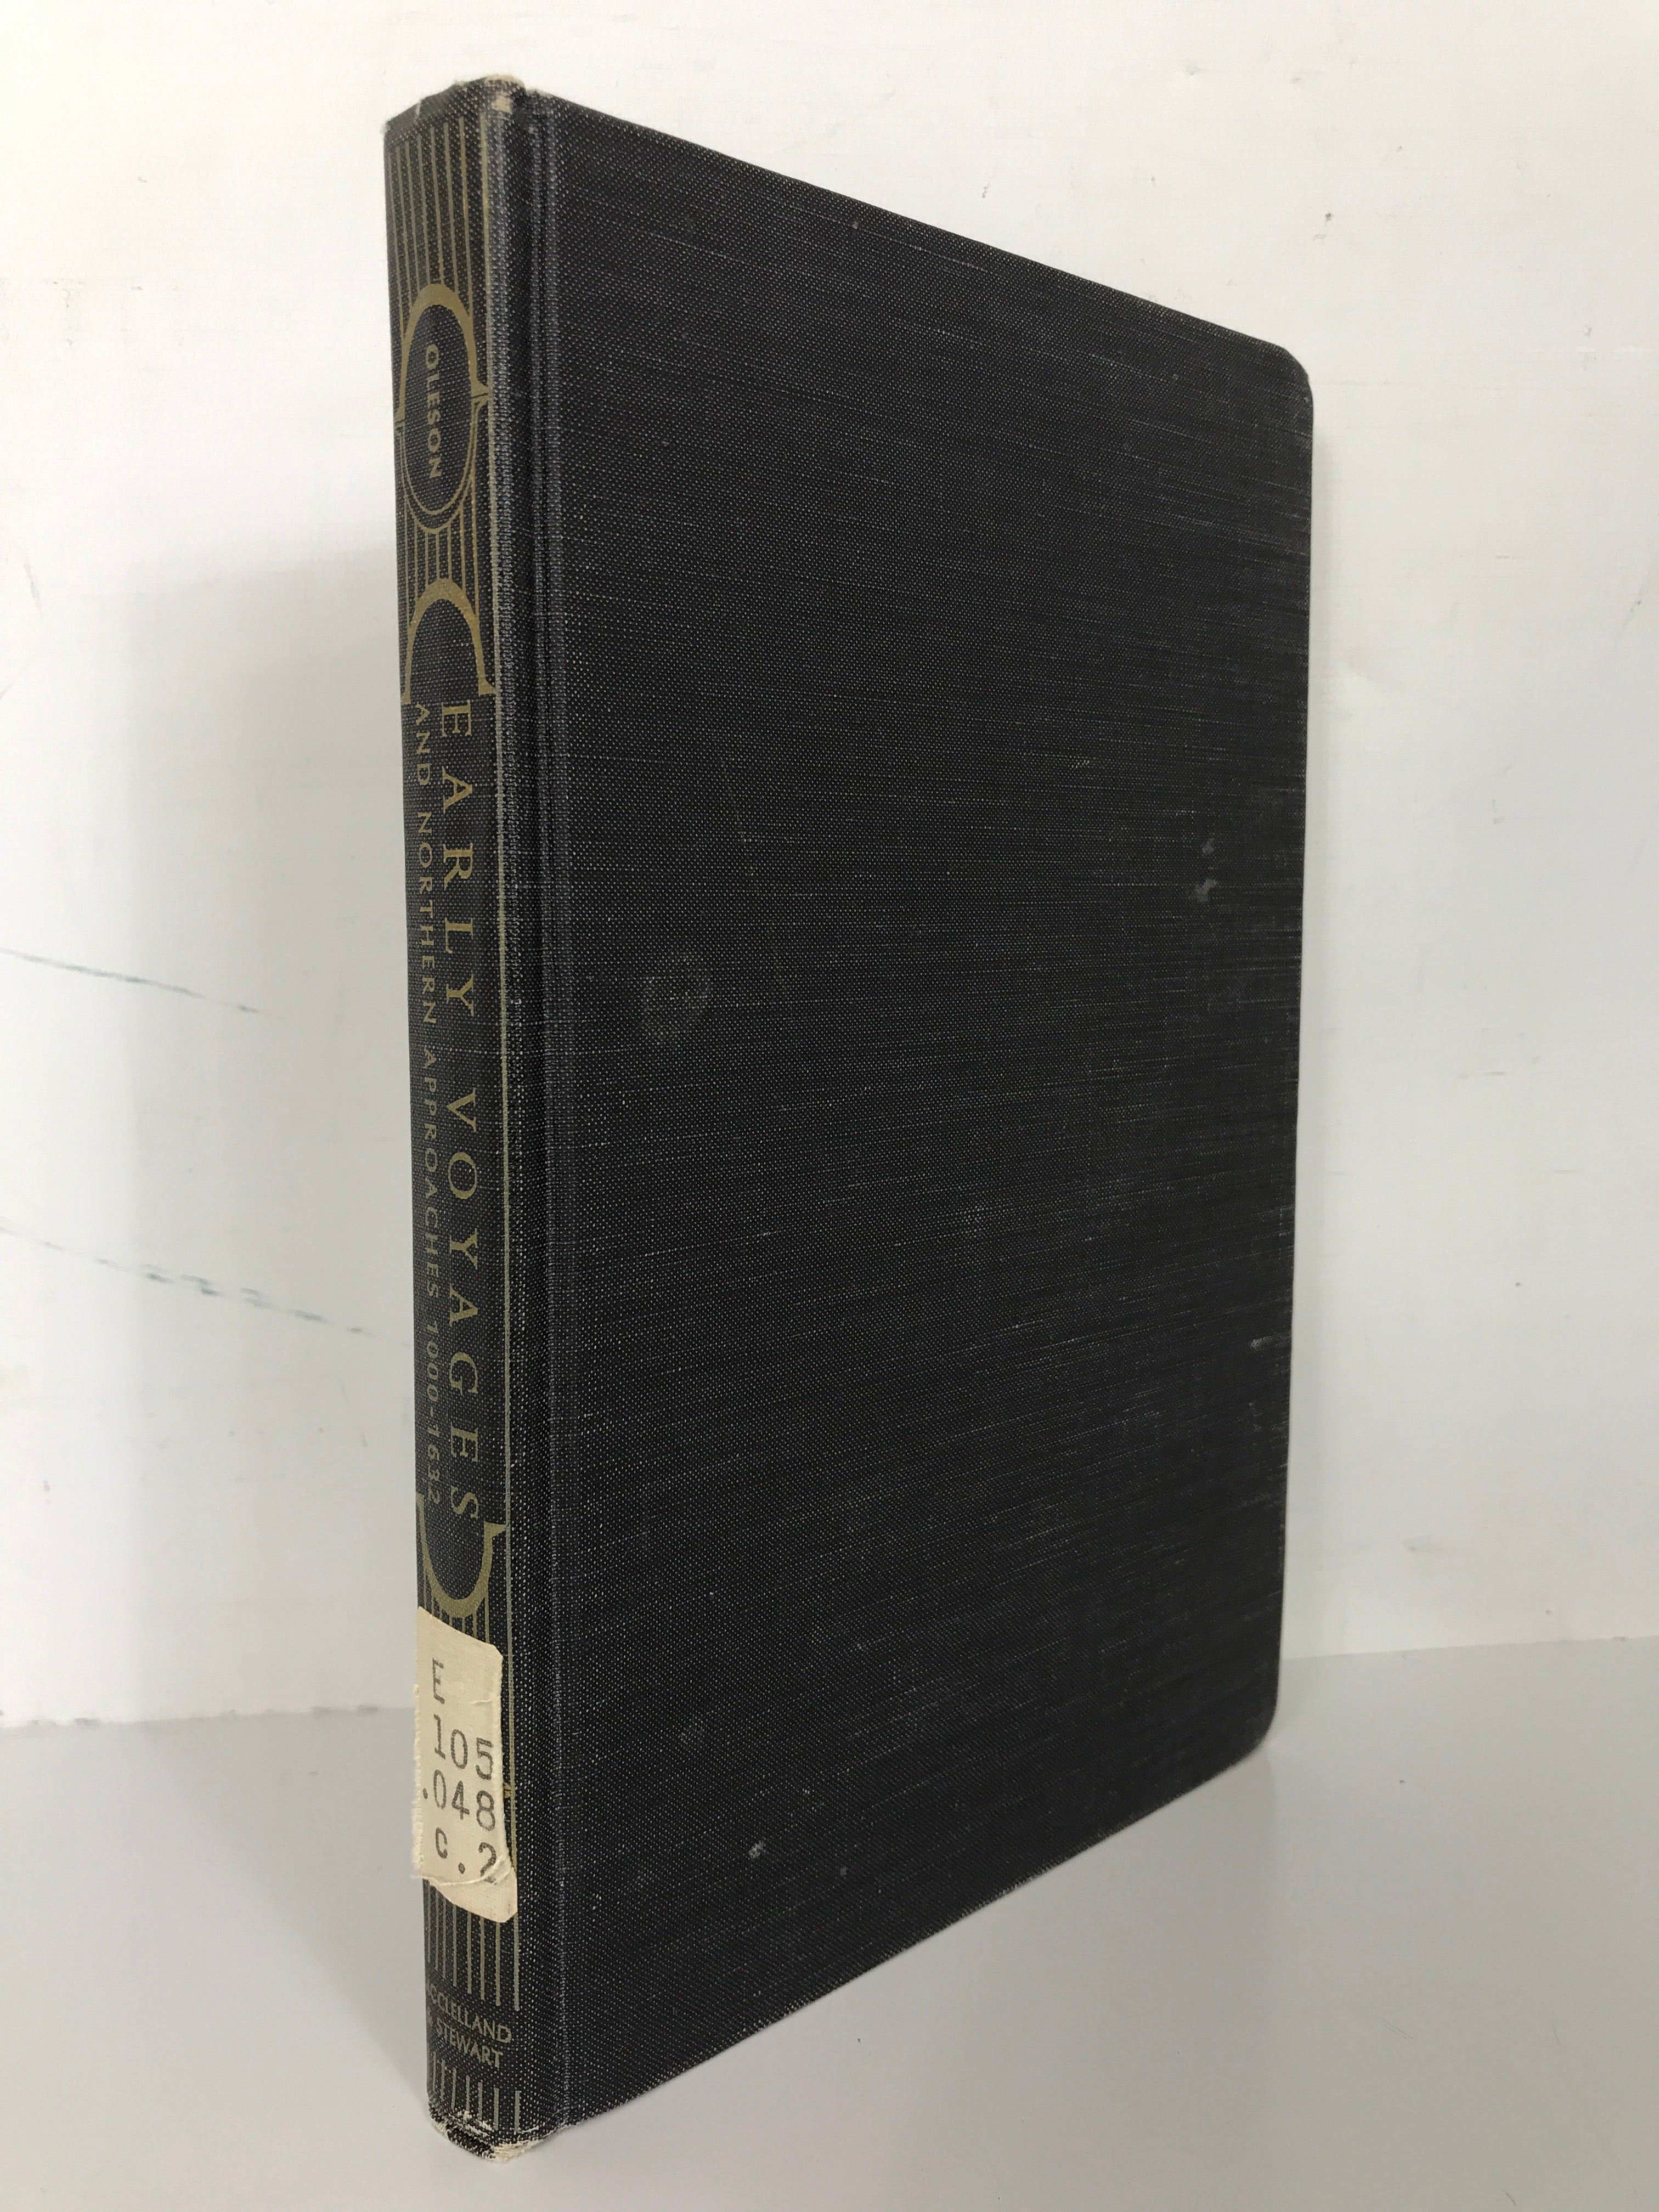 Early Voyages and Northern Approaches 1000-1632 by Oleson 1963 HC Ex-Lib